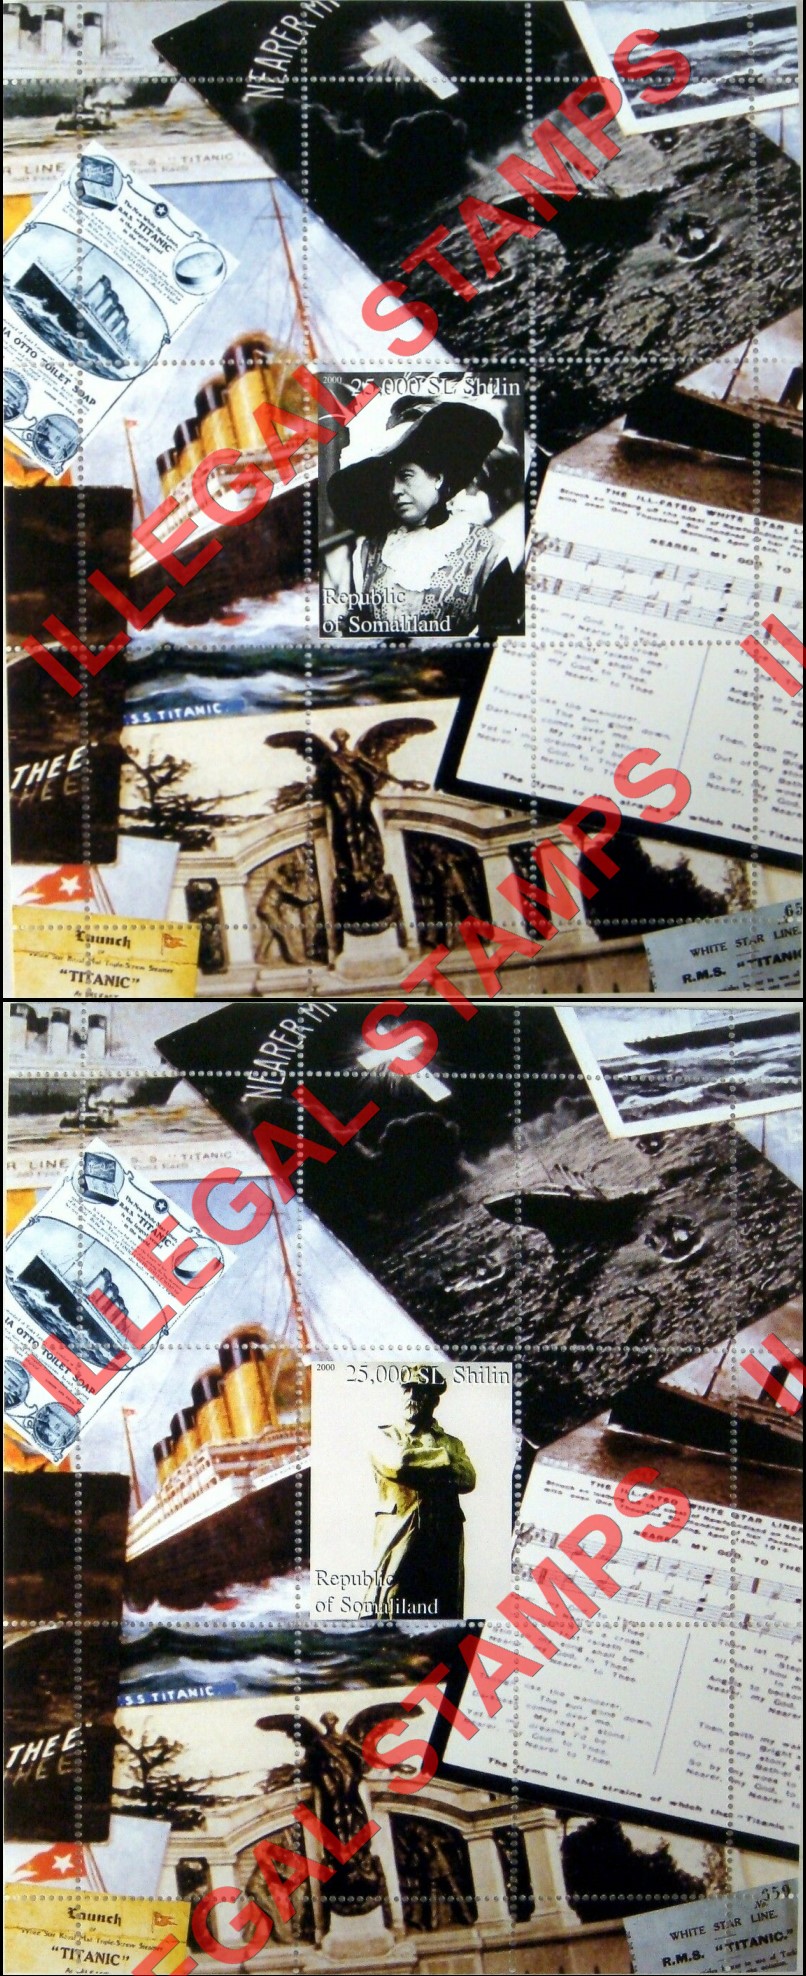 Somaliland 2000 Titanic Illegal Stamp Souvenir Sheets of 1